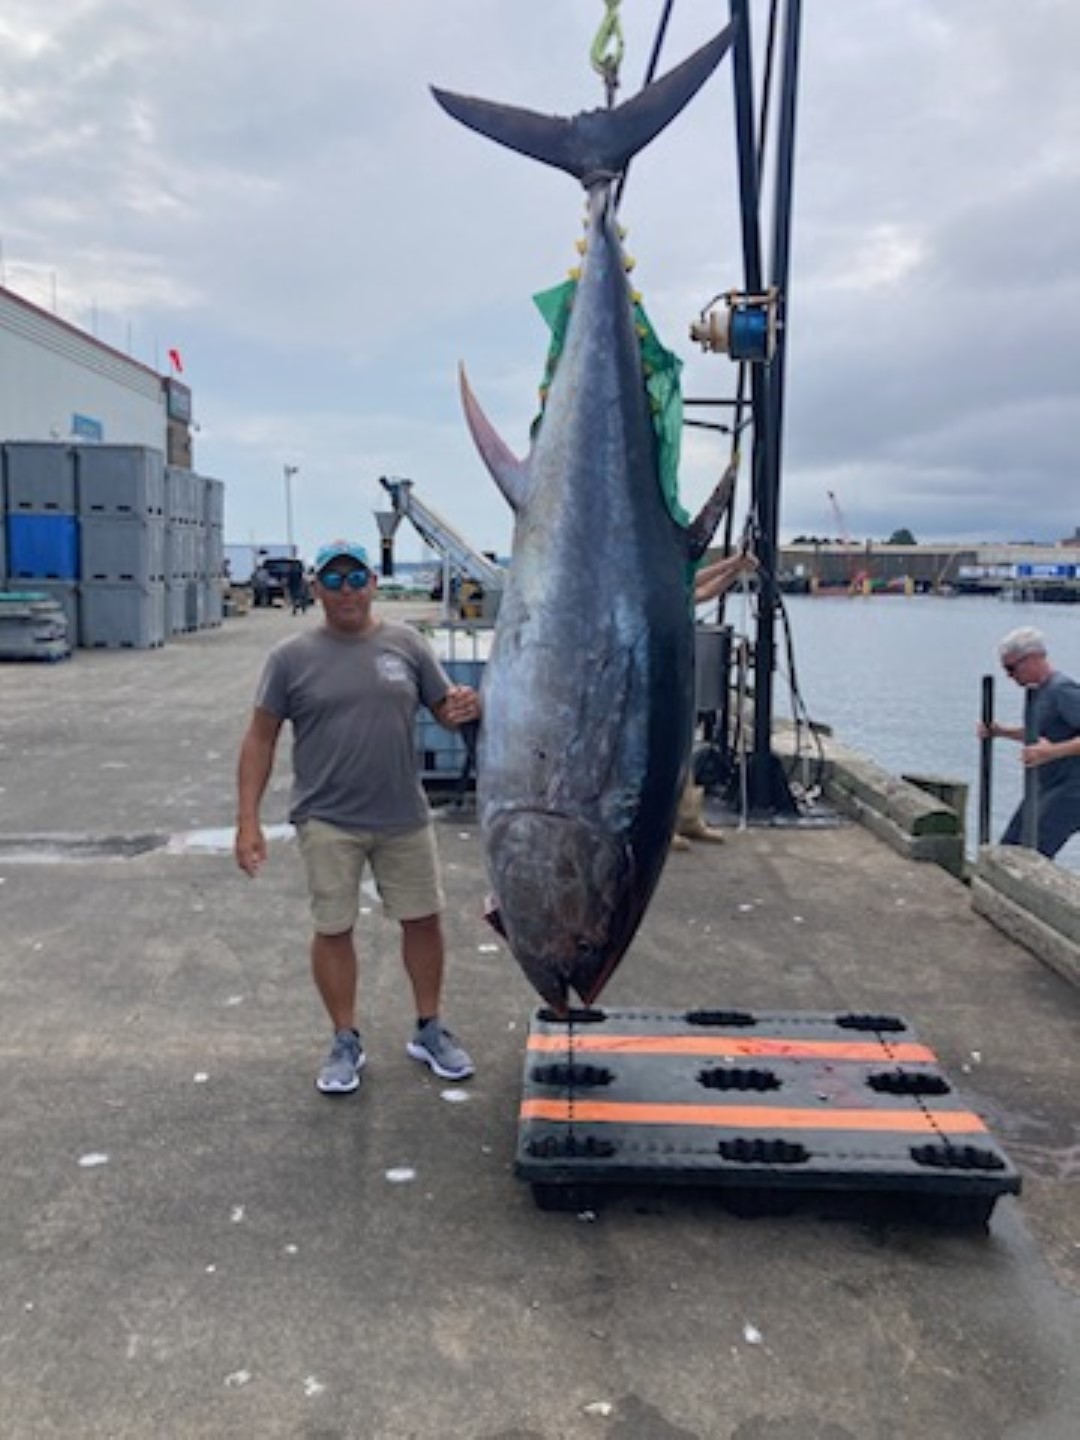 Your Turn for Bluefin Tuna Charter, Wed, Thurs Oct 4, 5 – Primetime!